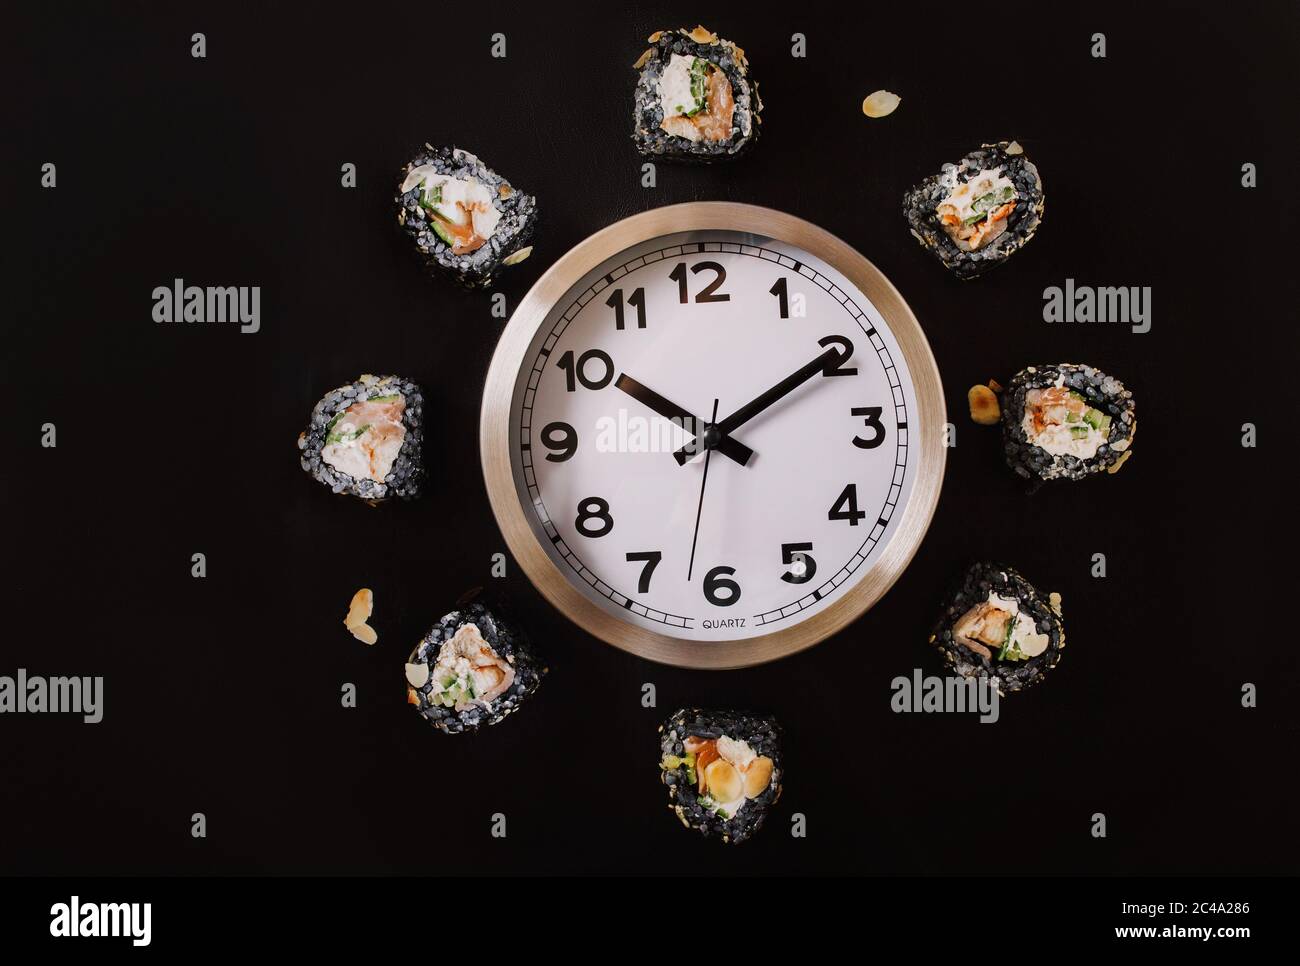 Sushi time in the form of a wall clock on a concrete background. Sushi clock. Place for text Stock Photo